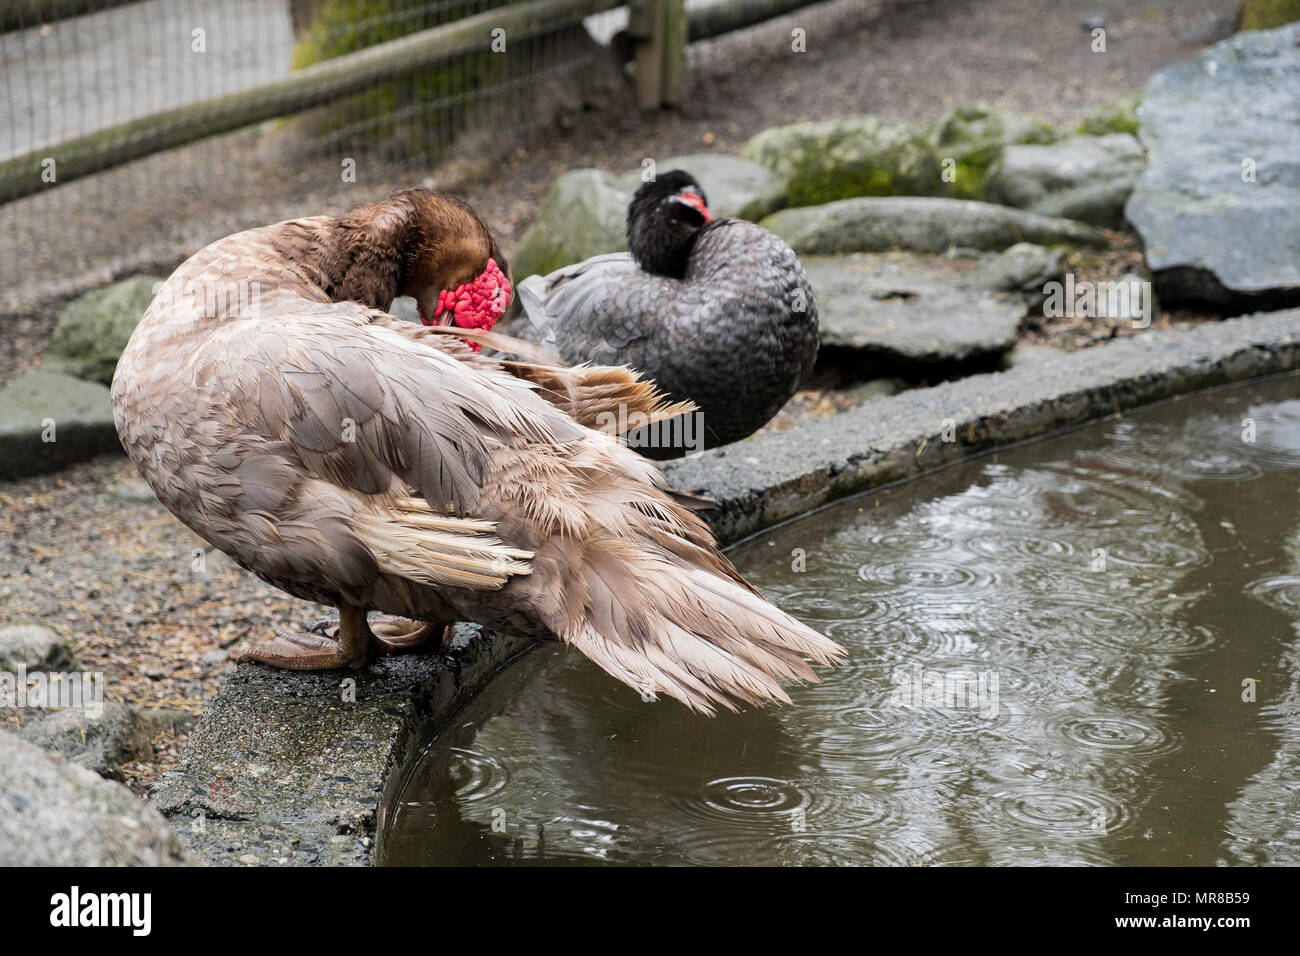 Some ducks in the petting zoo in Beacon Hill Park in Victoria, B.C. Stock Photo